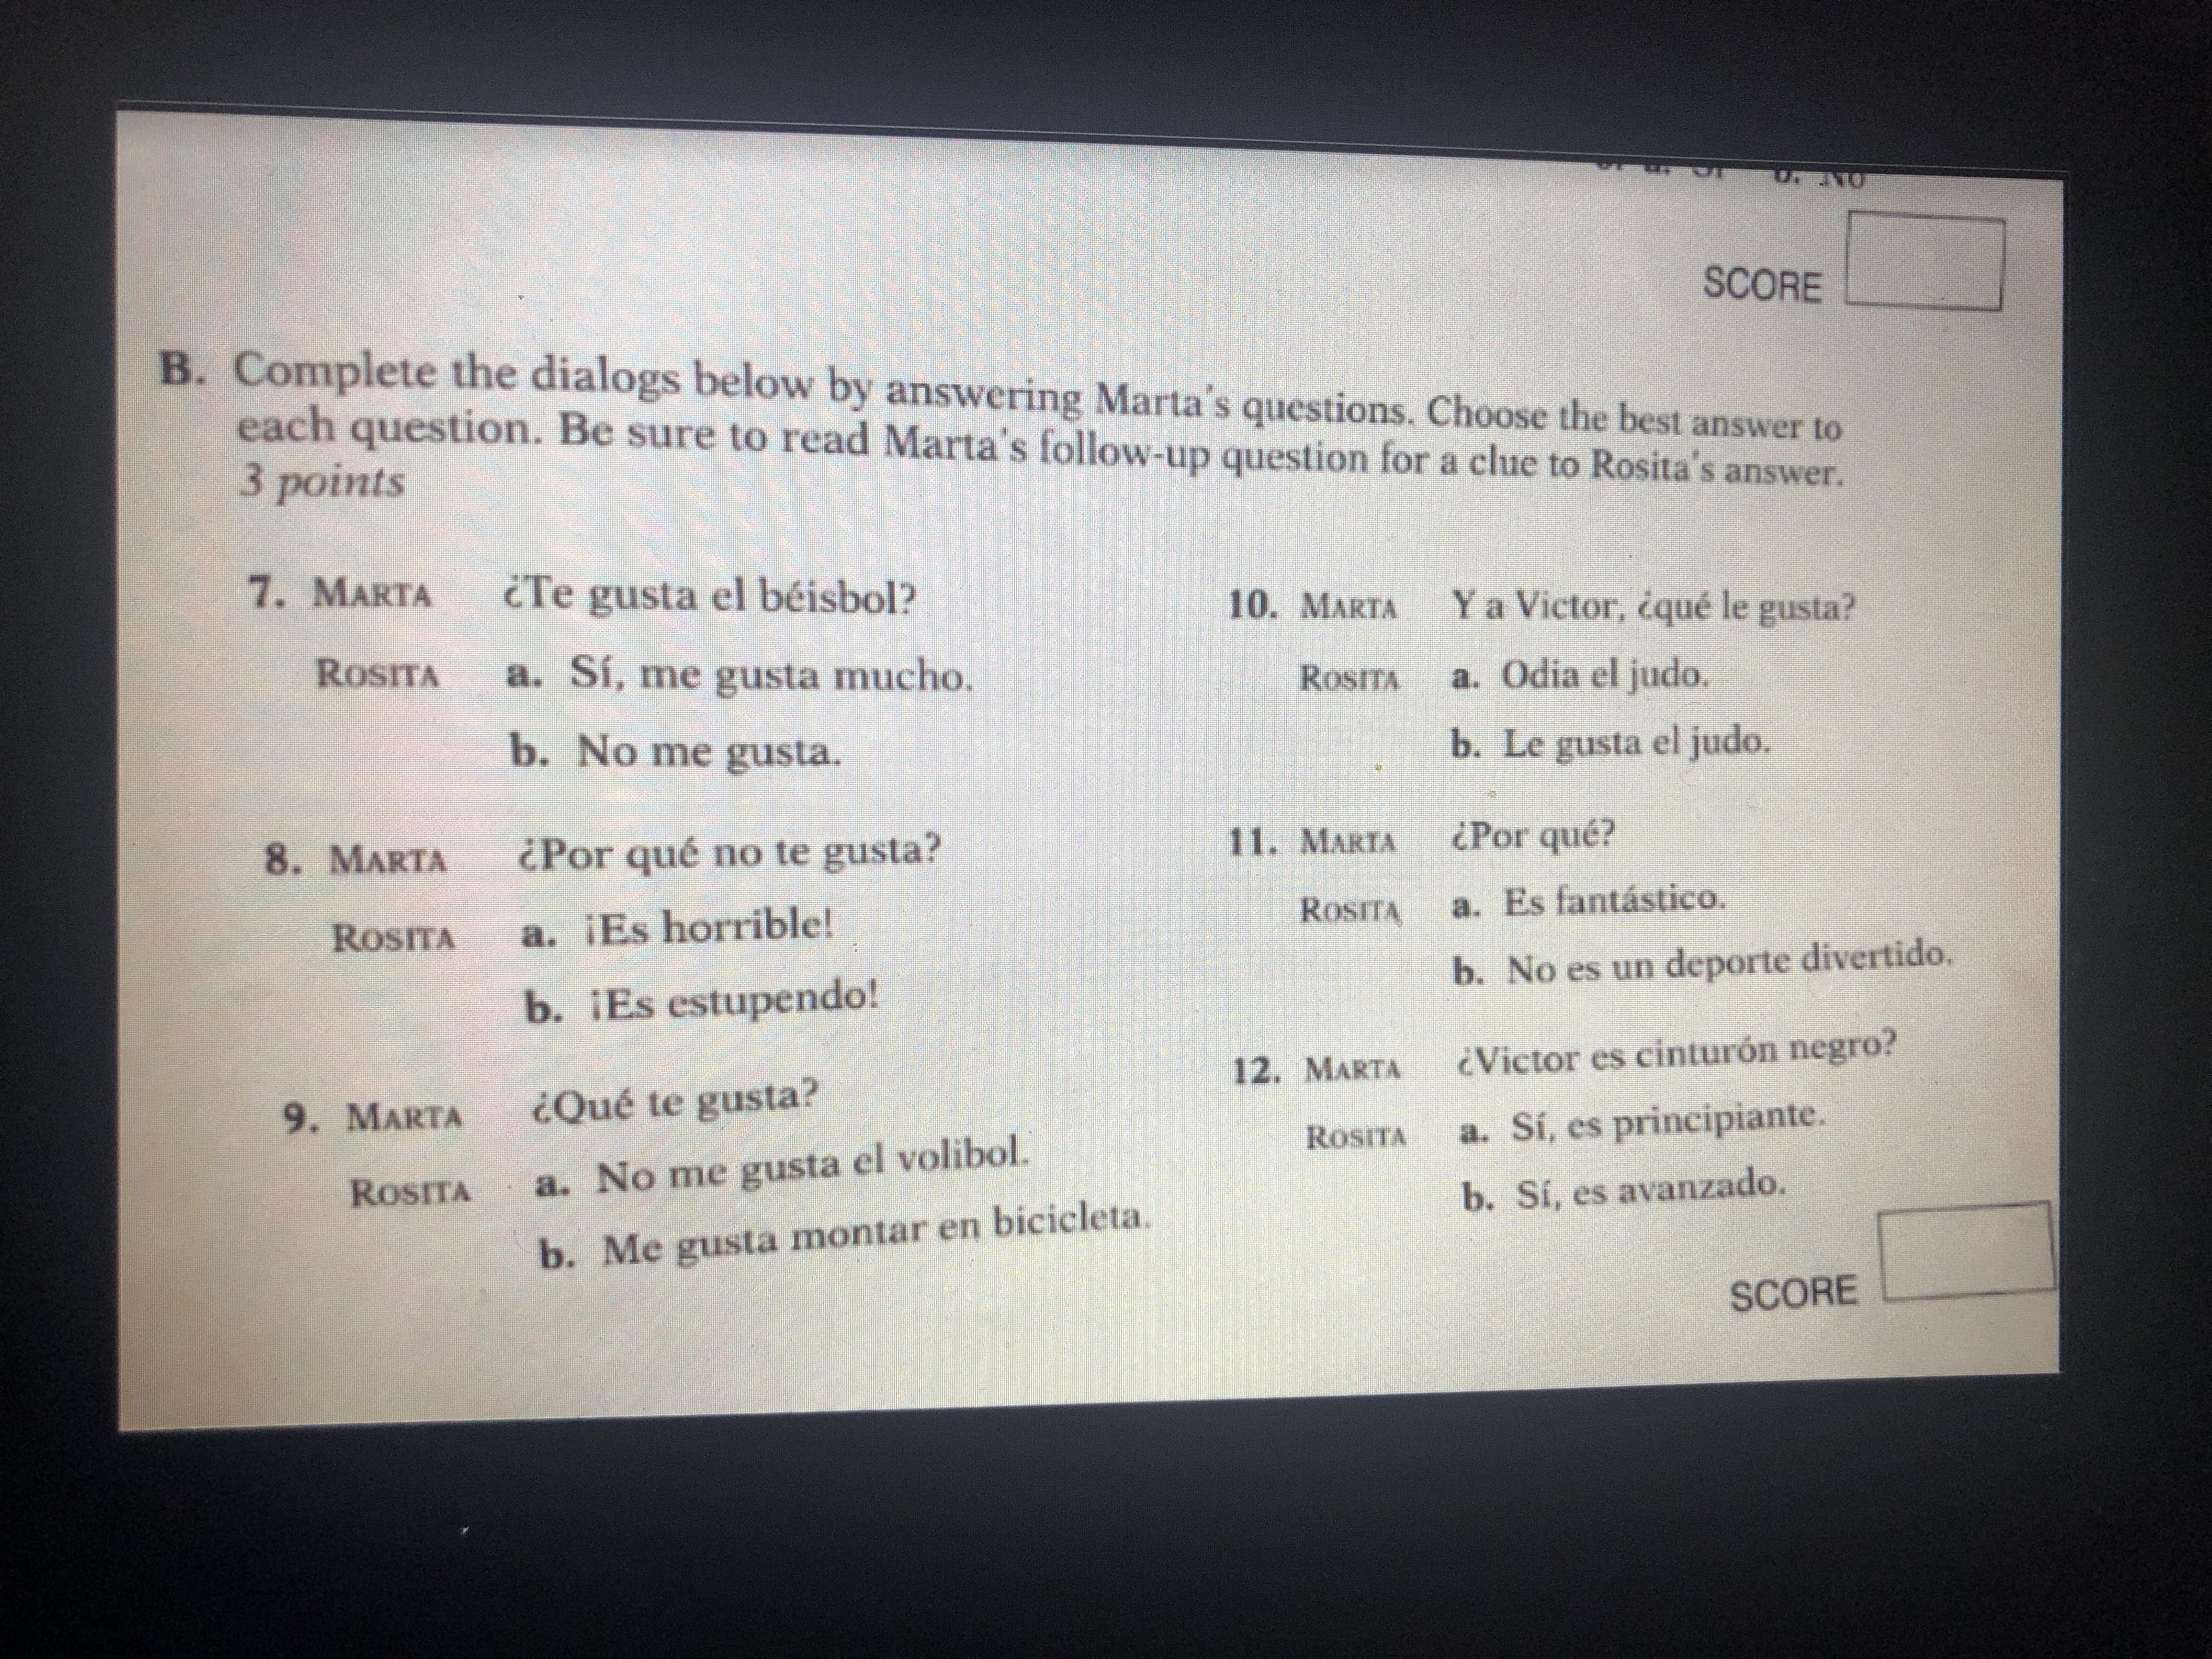 Please Help Me. I Dont Know Any Spanish And I Was Randomly Put Here. I Will Do Anything...Im Desperate